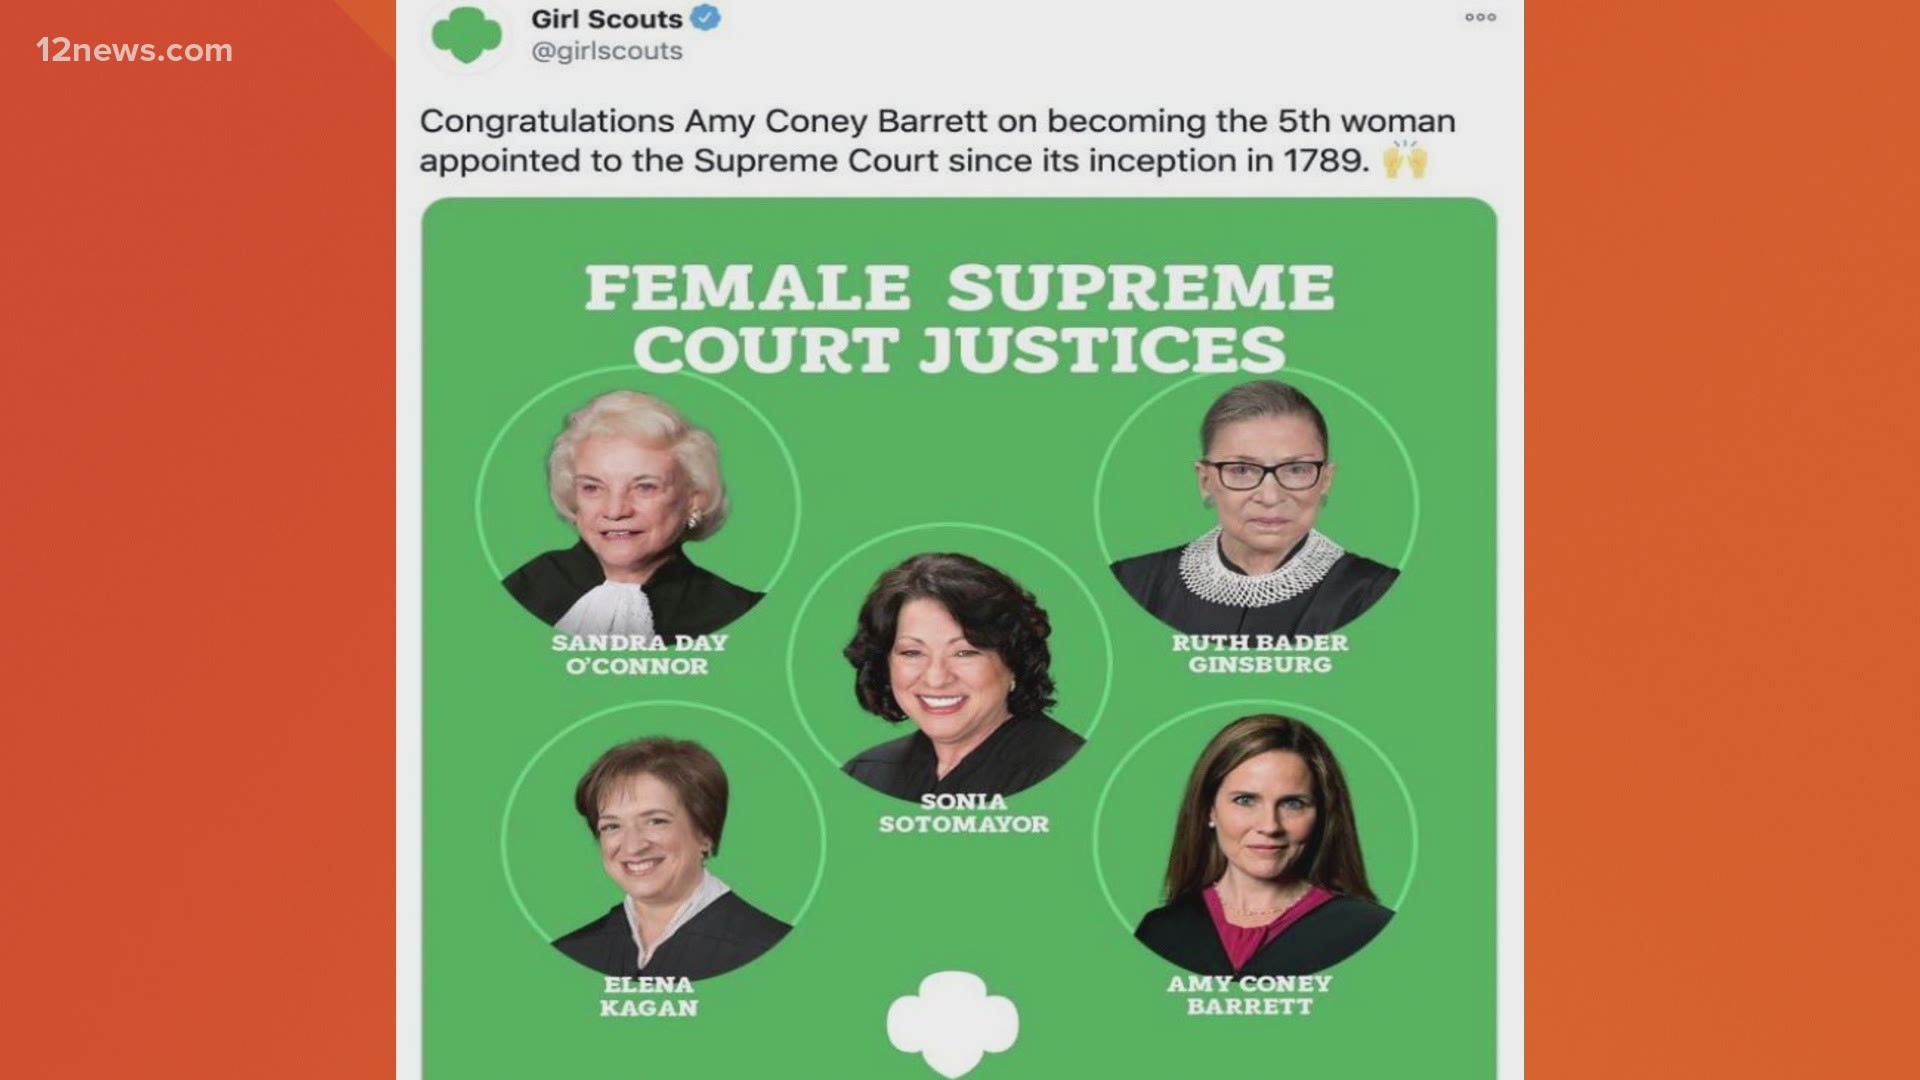 The Girl Scouts deleted a post congratulating Amy Coney Barrett after an angry backlash. Should they keep it down or put it back?